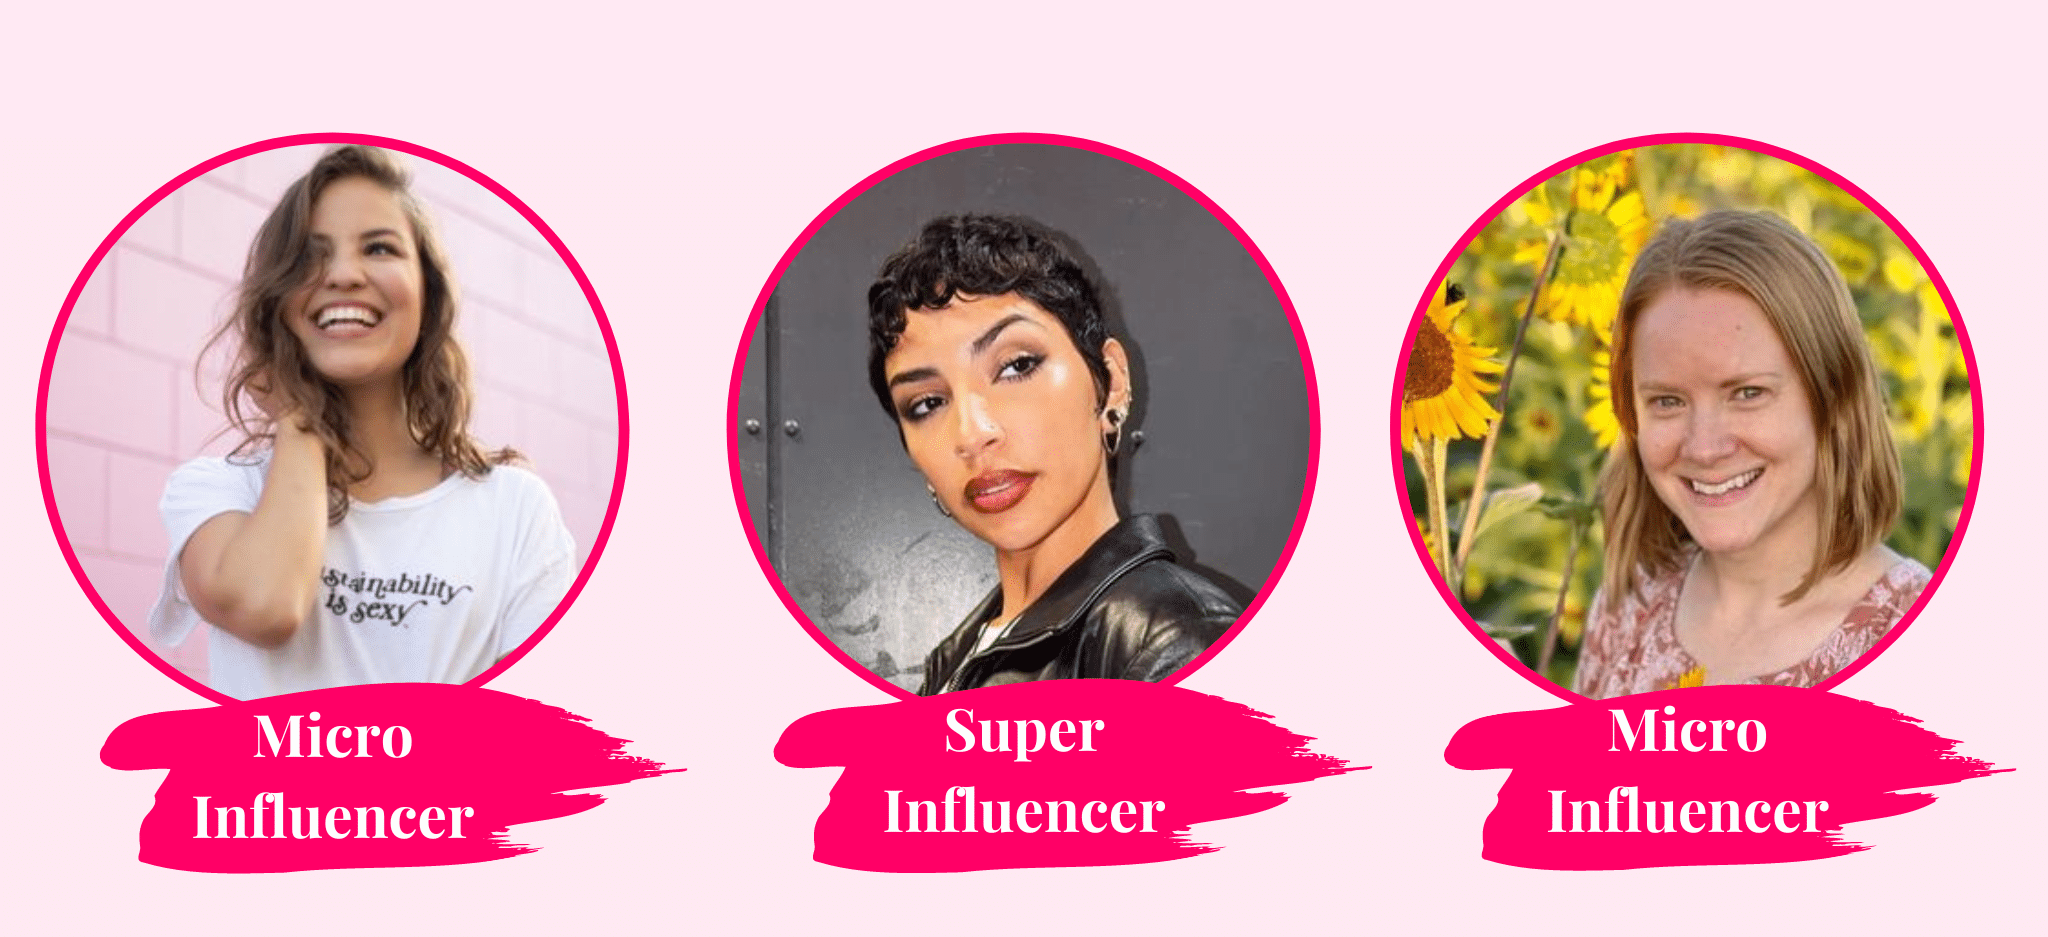 different types of eco friendly influencers - pictured are thegirlgonegreen, Penny tovar and Amber.